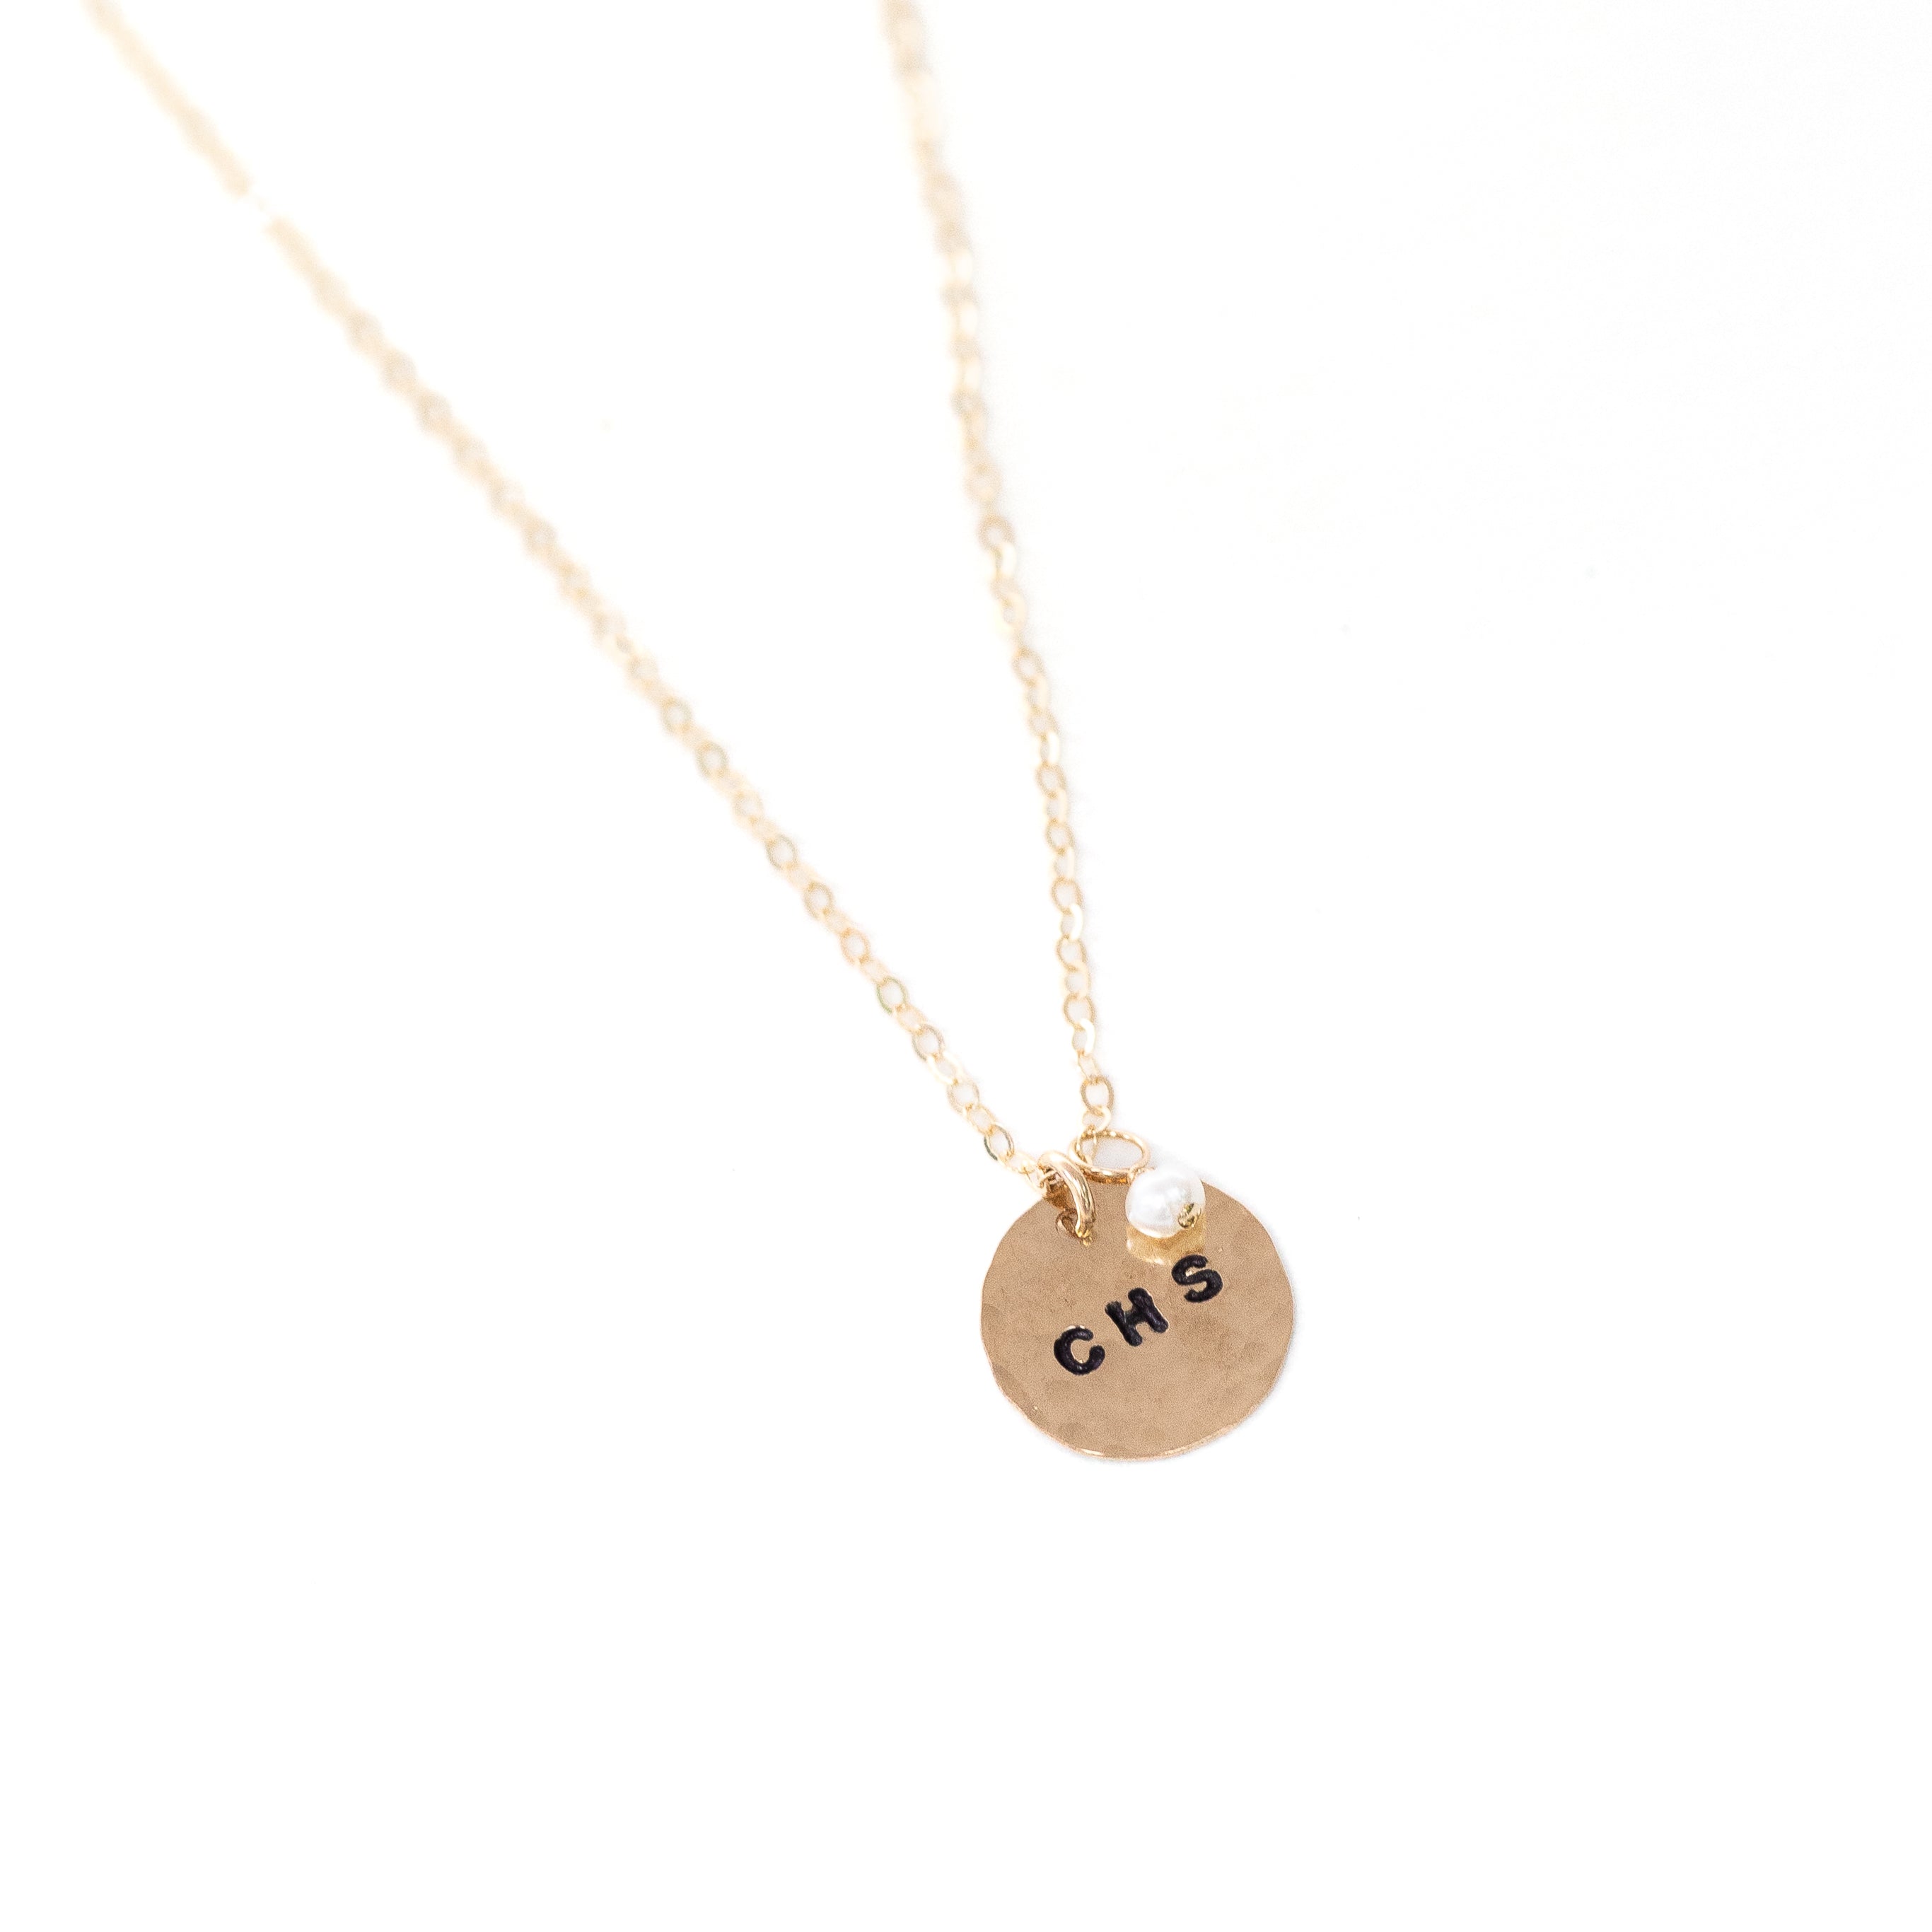 A gold circle stamped necklace with the additional pearl hanging from it.